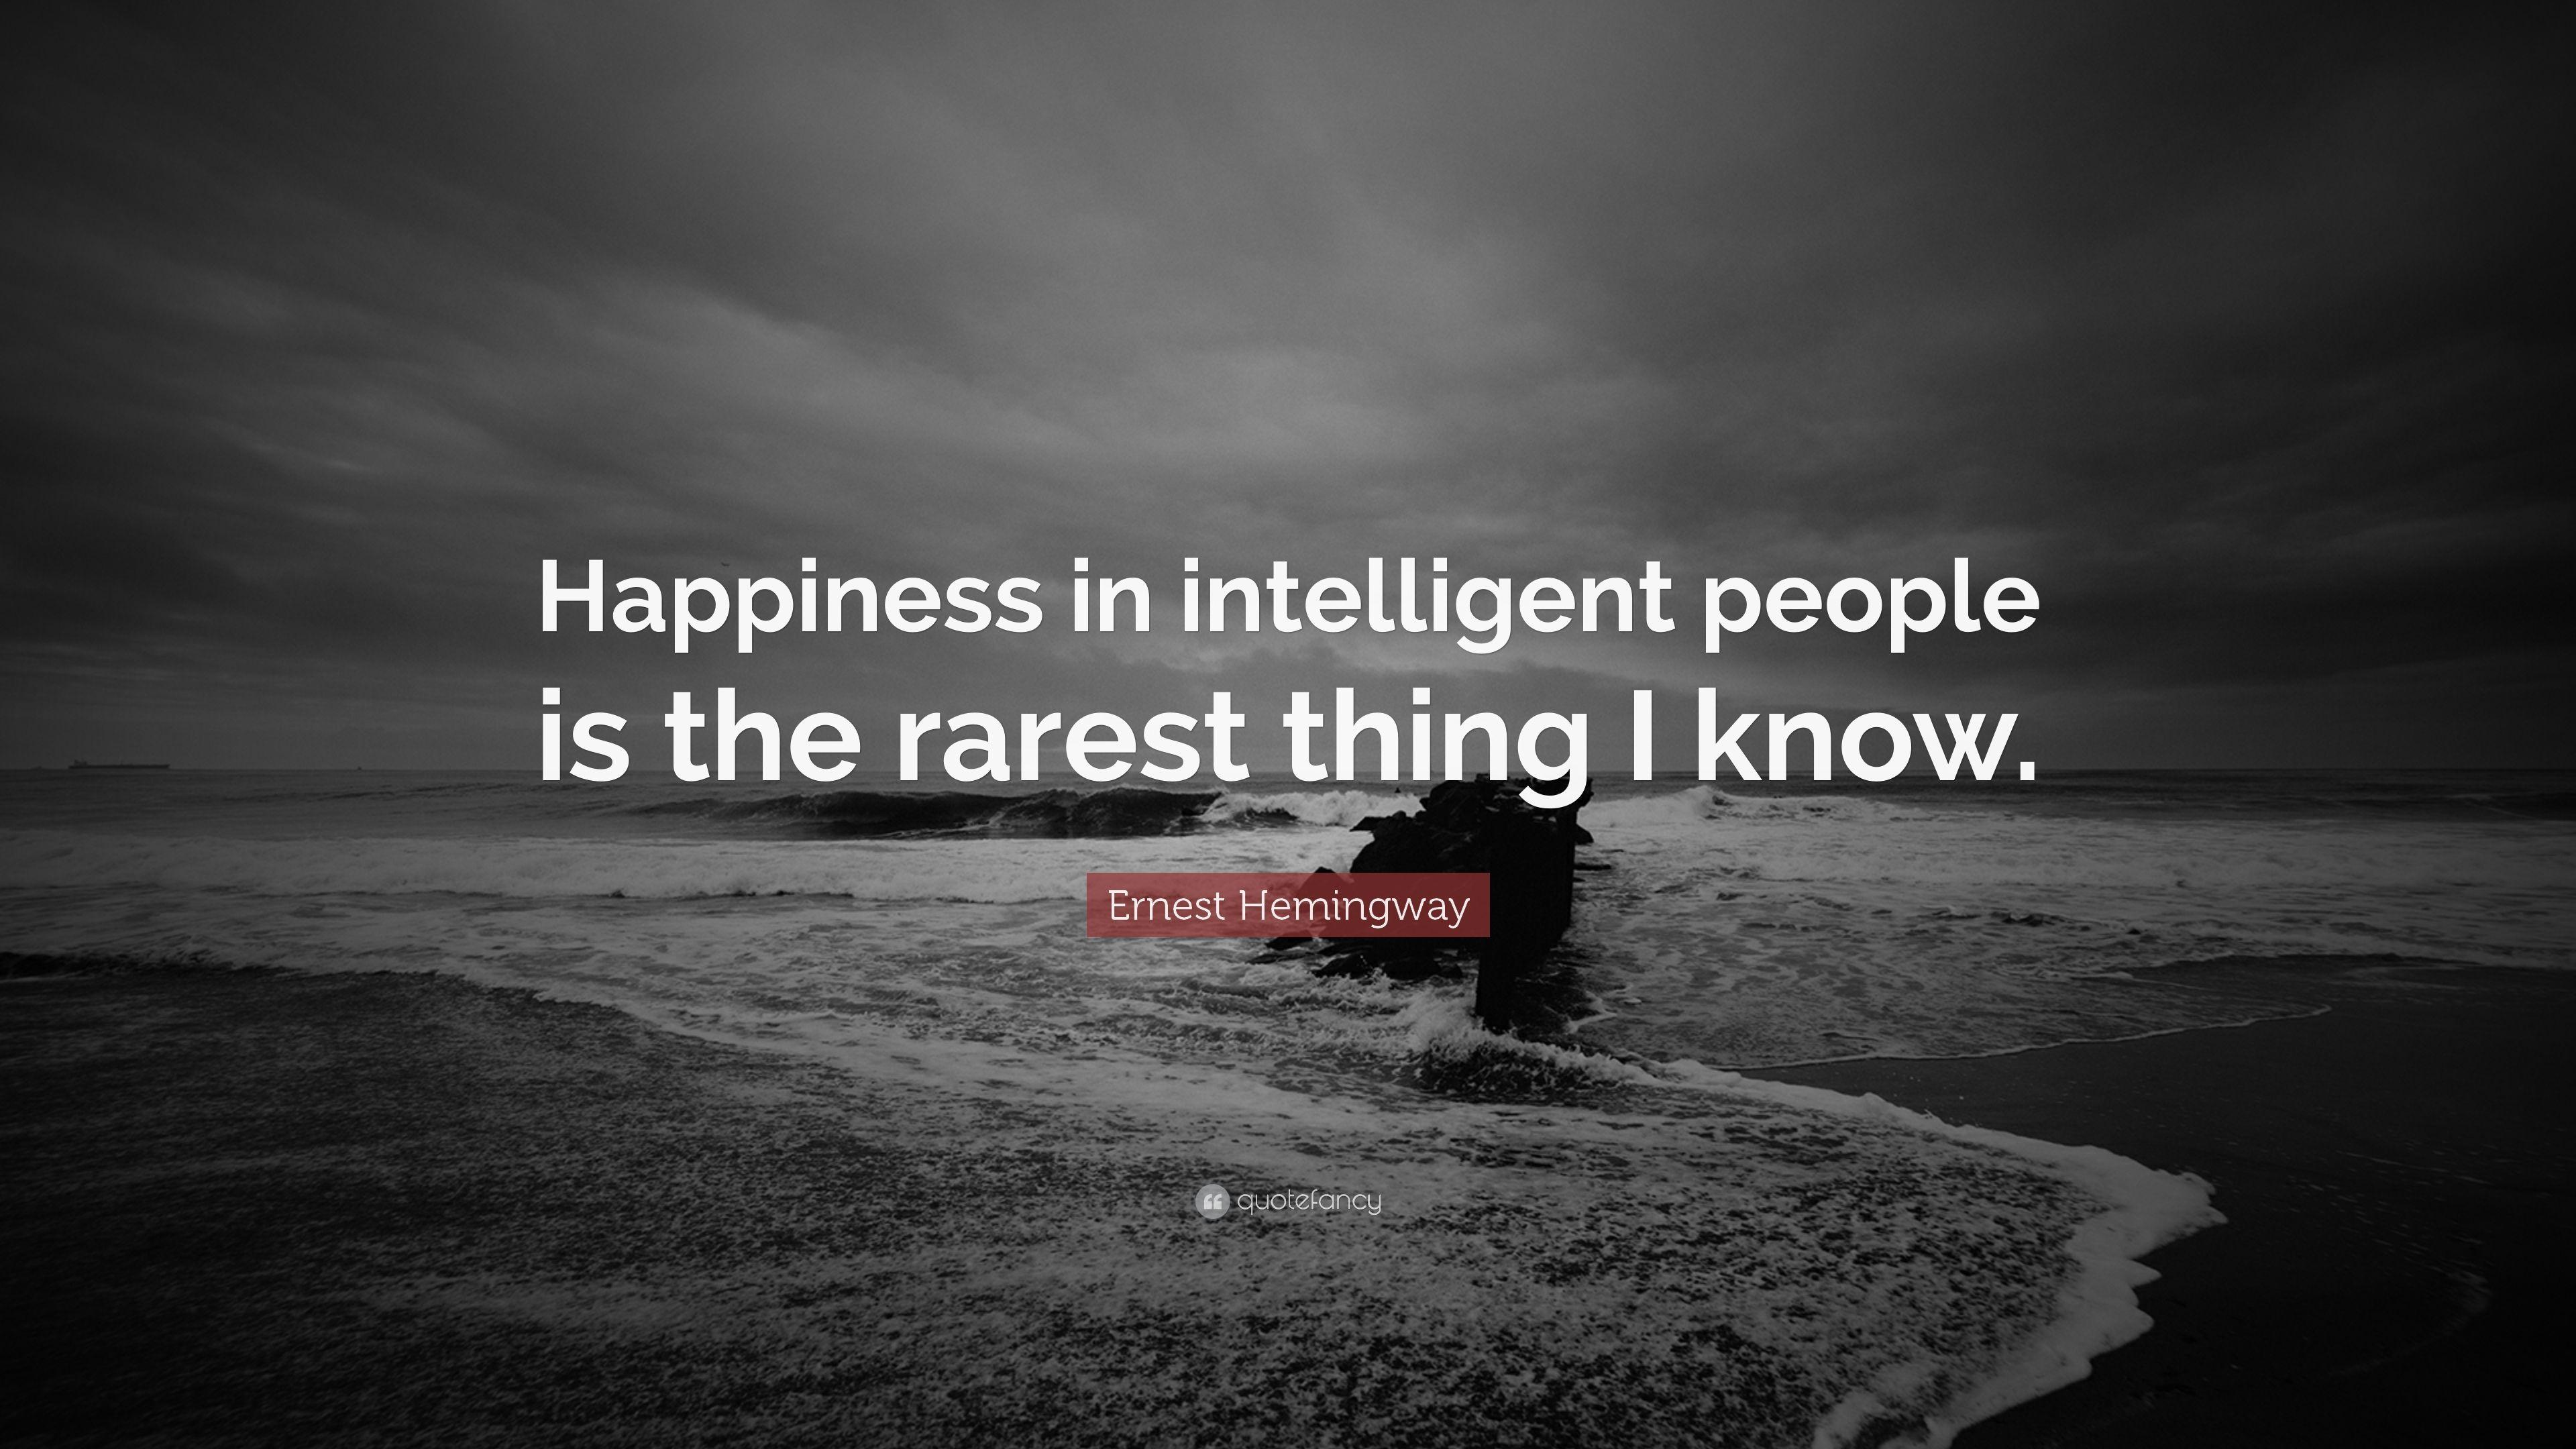 Ernest Hemingway Quote: “Happiness in intelligent people is